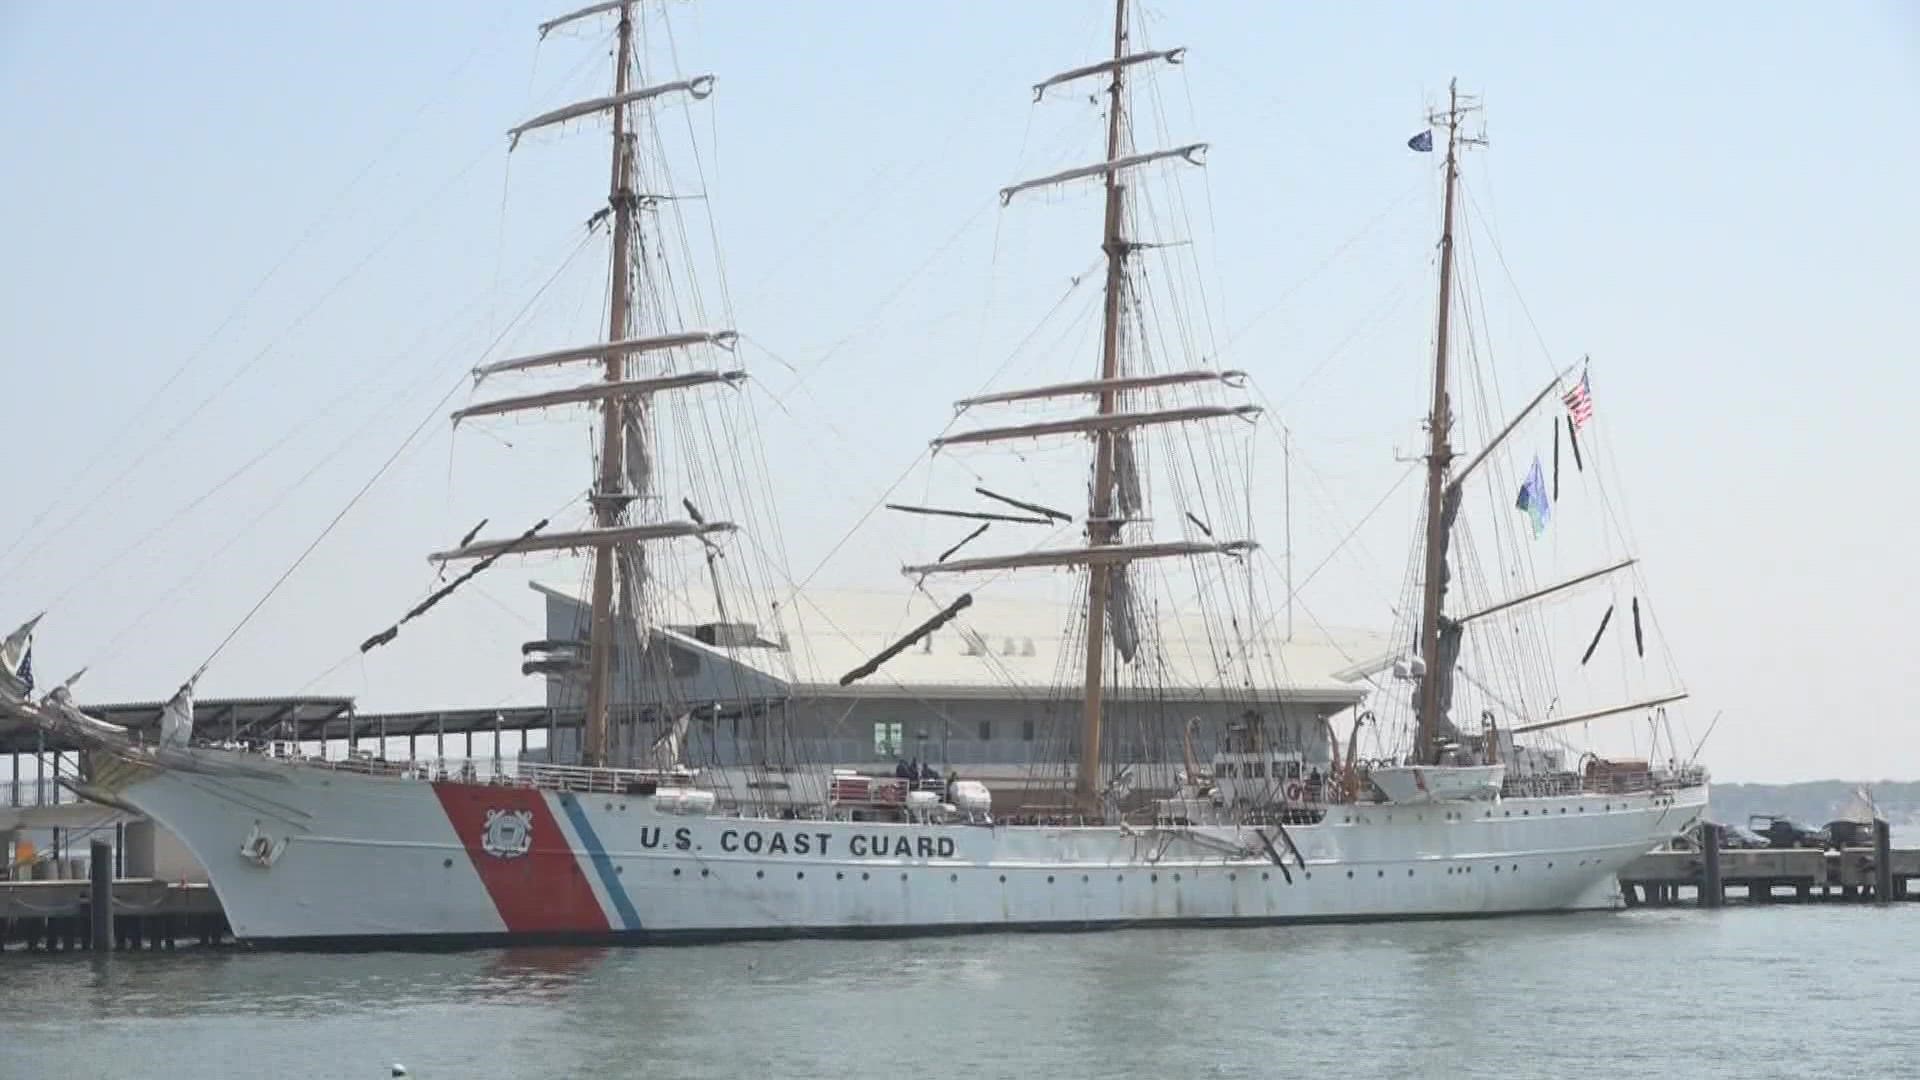 People will be able to tour the U.S. Coast Guard Cutter Eagle this weekend.